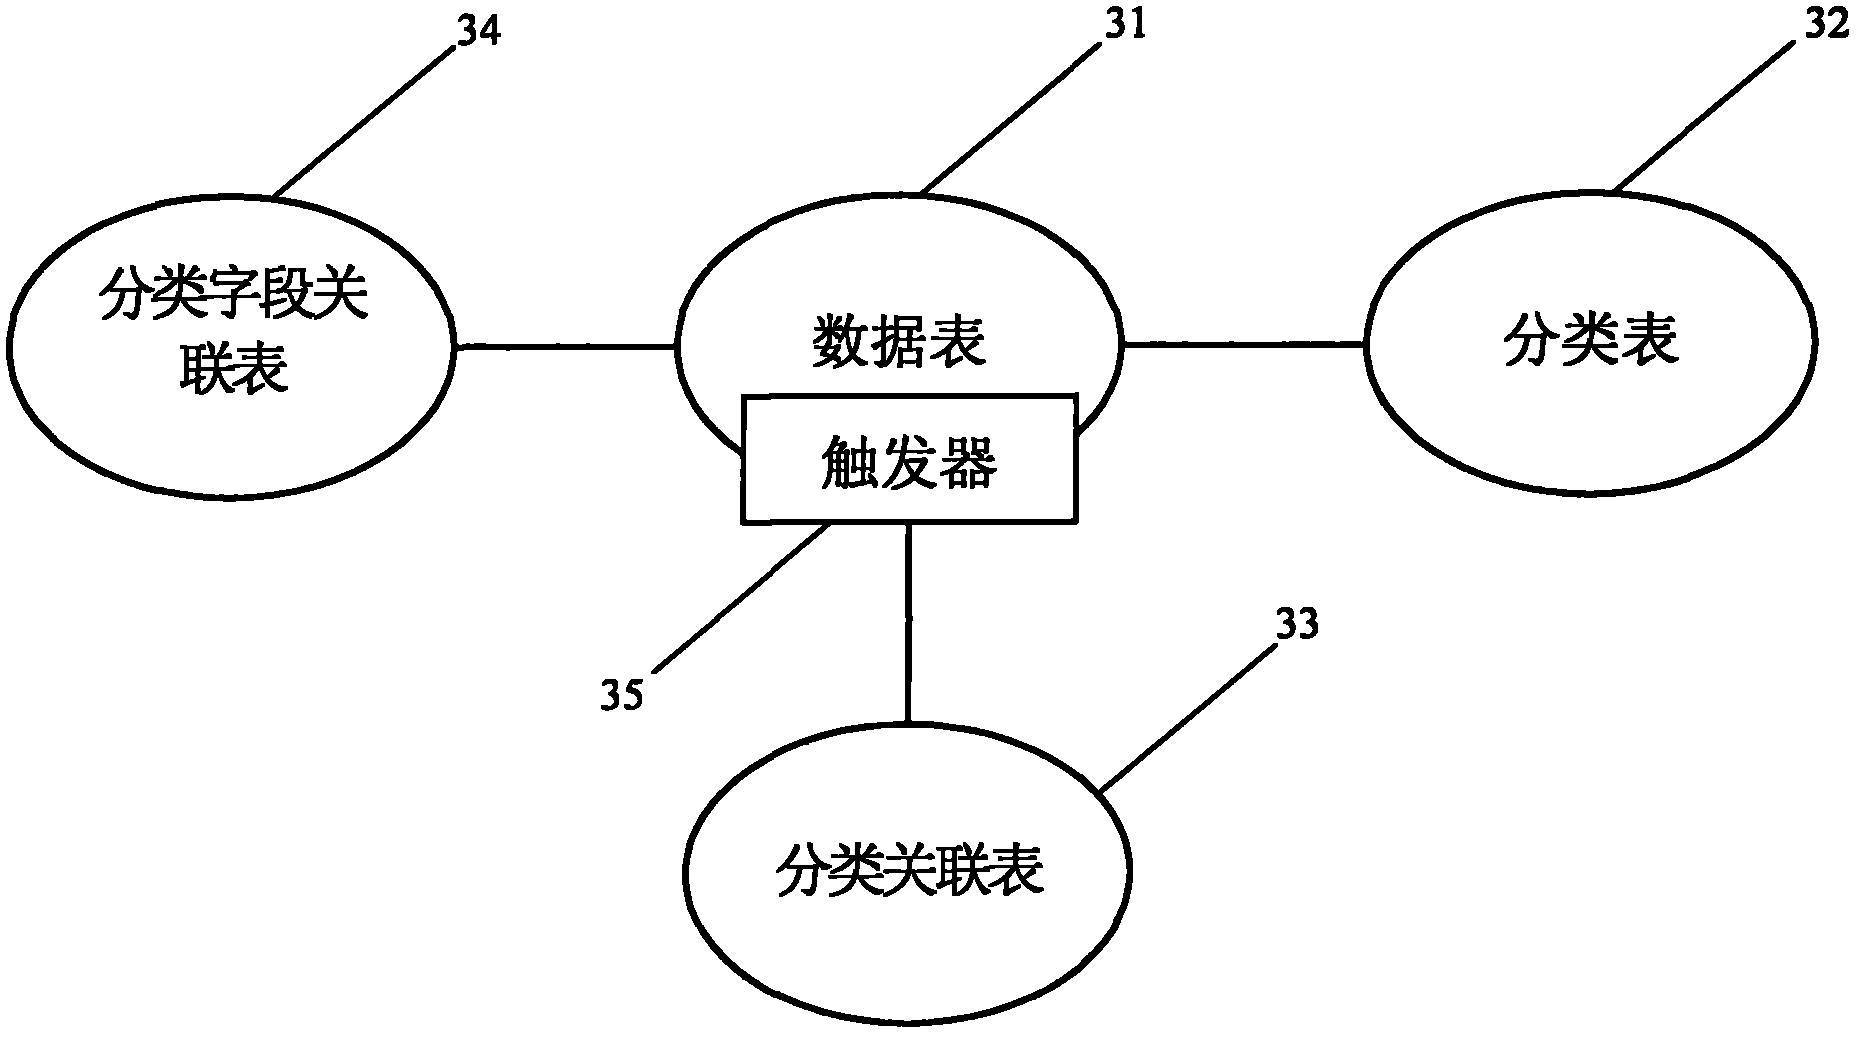 Easily-extensible multi-level classification search method and system